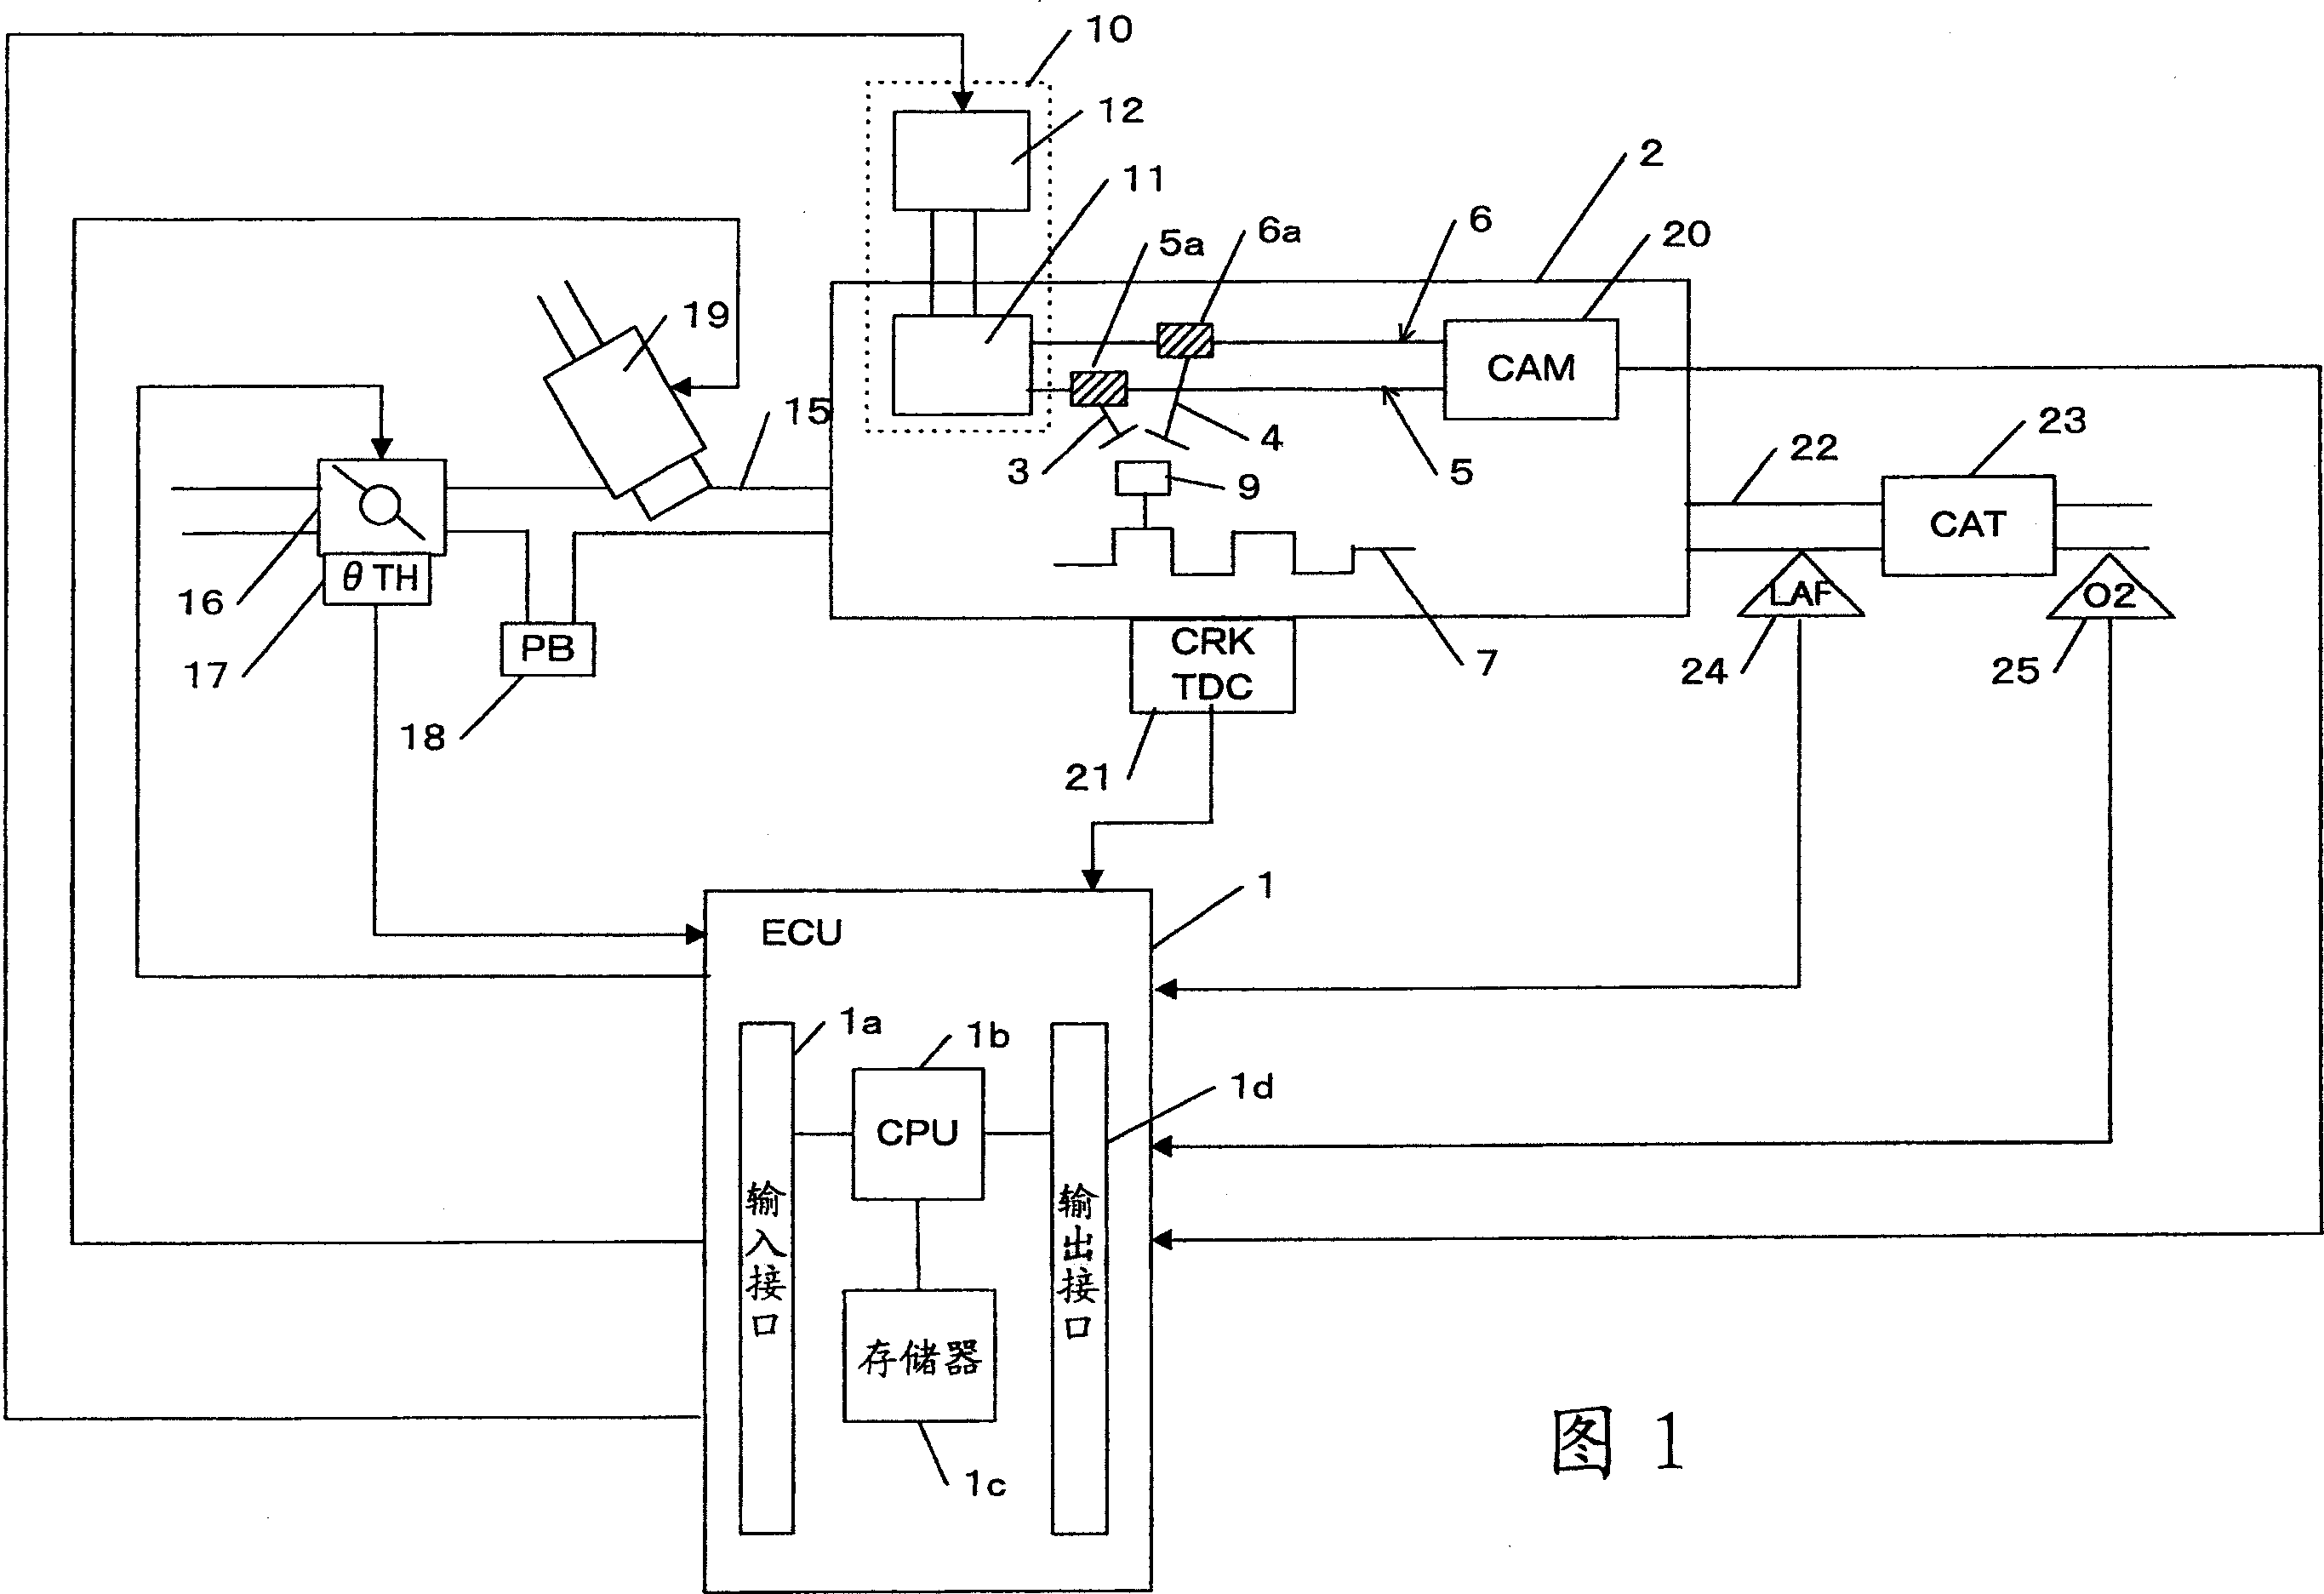 A control apparatus for controlling a plant by using a delta-sigma modulation algorithm